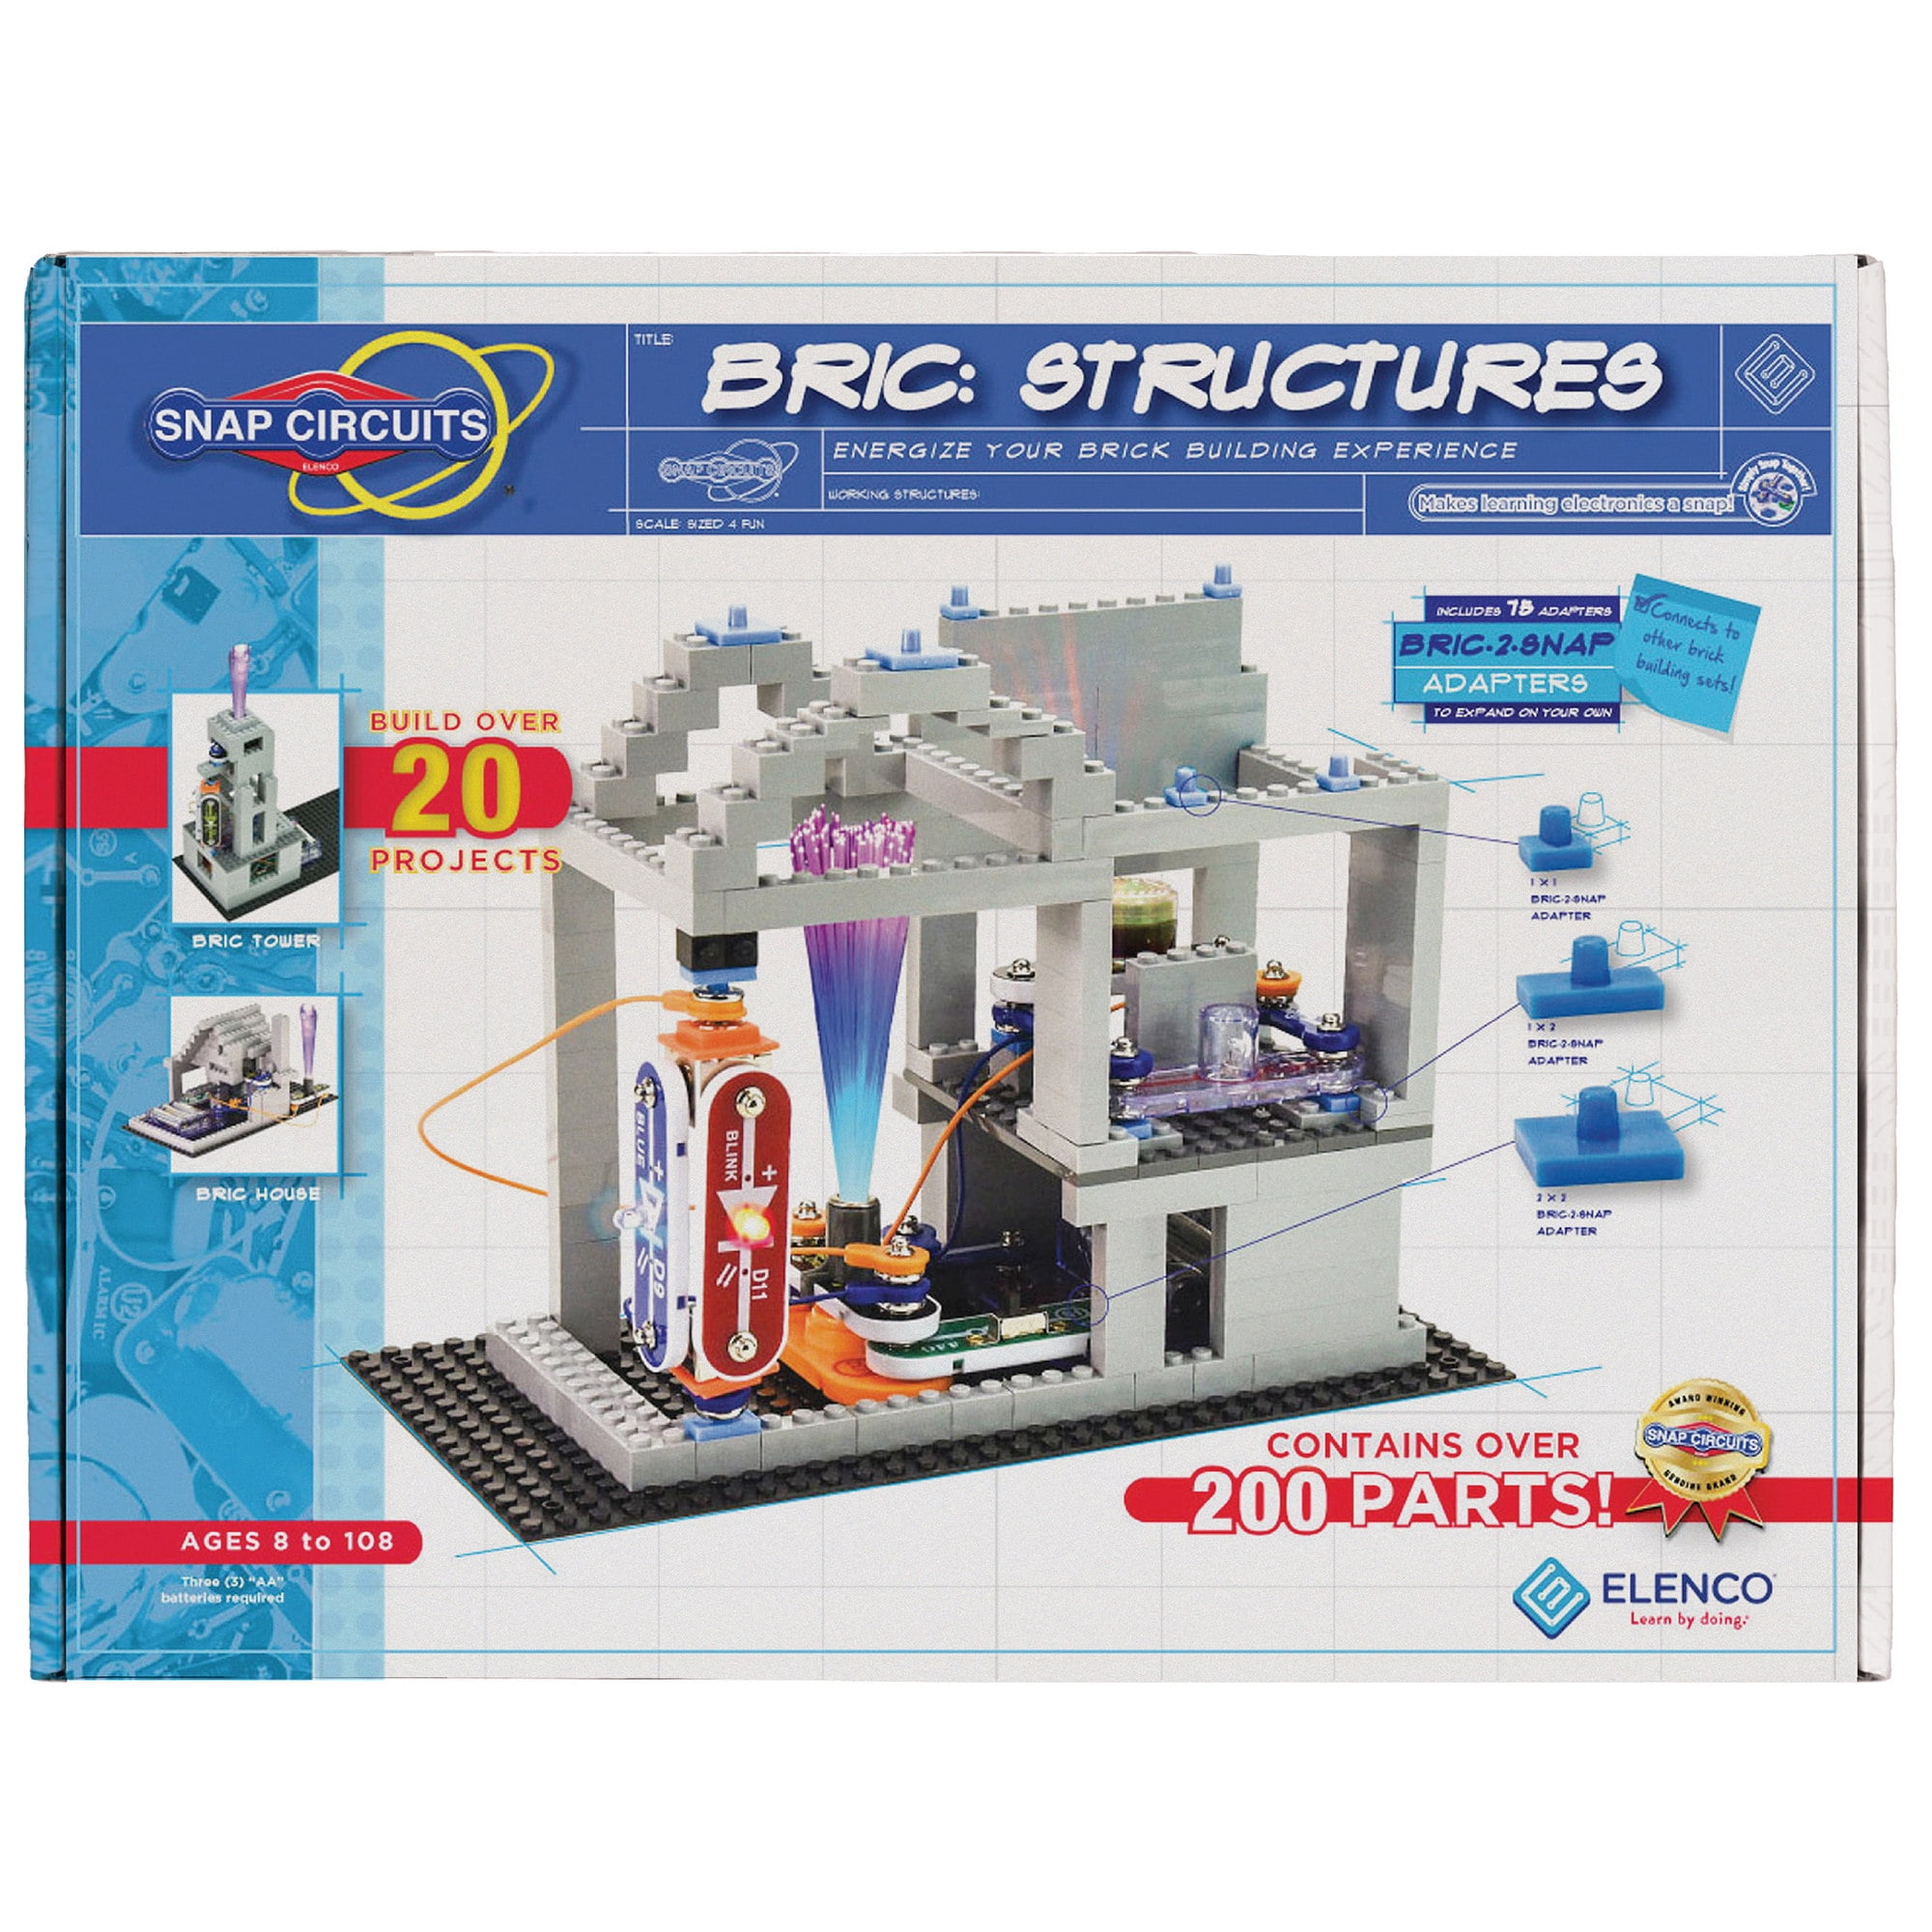 Snap-Circuits-BRIC-Structures-Exploration-Kit-with-Over-20-Stem-Brick-Projects-Includes-Manual-200-Parts_c657891e-70cd-4742-8ef4-a1728f5d509c.0bbb91000c45eb063574847ed0610ef5.jpeg?odnHeight=2000&odnWidth=2000&odnBg=FFFFFF